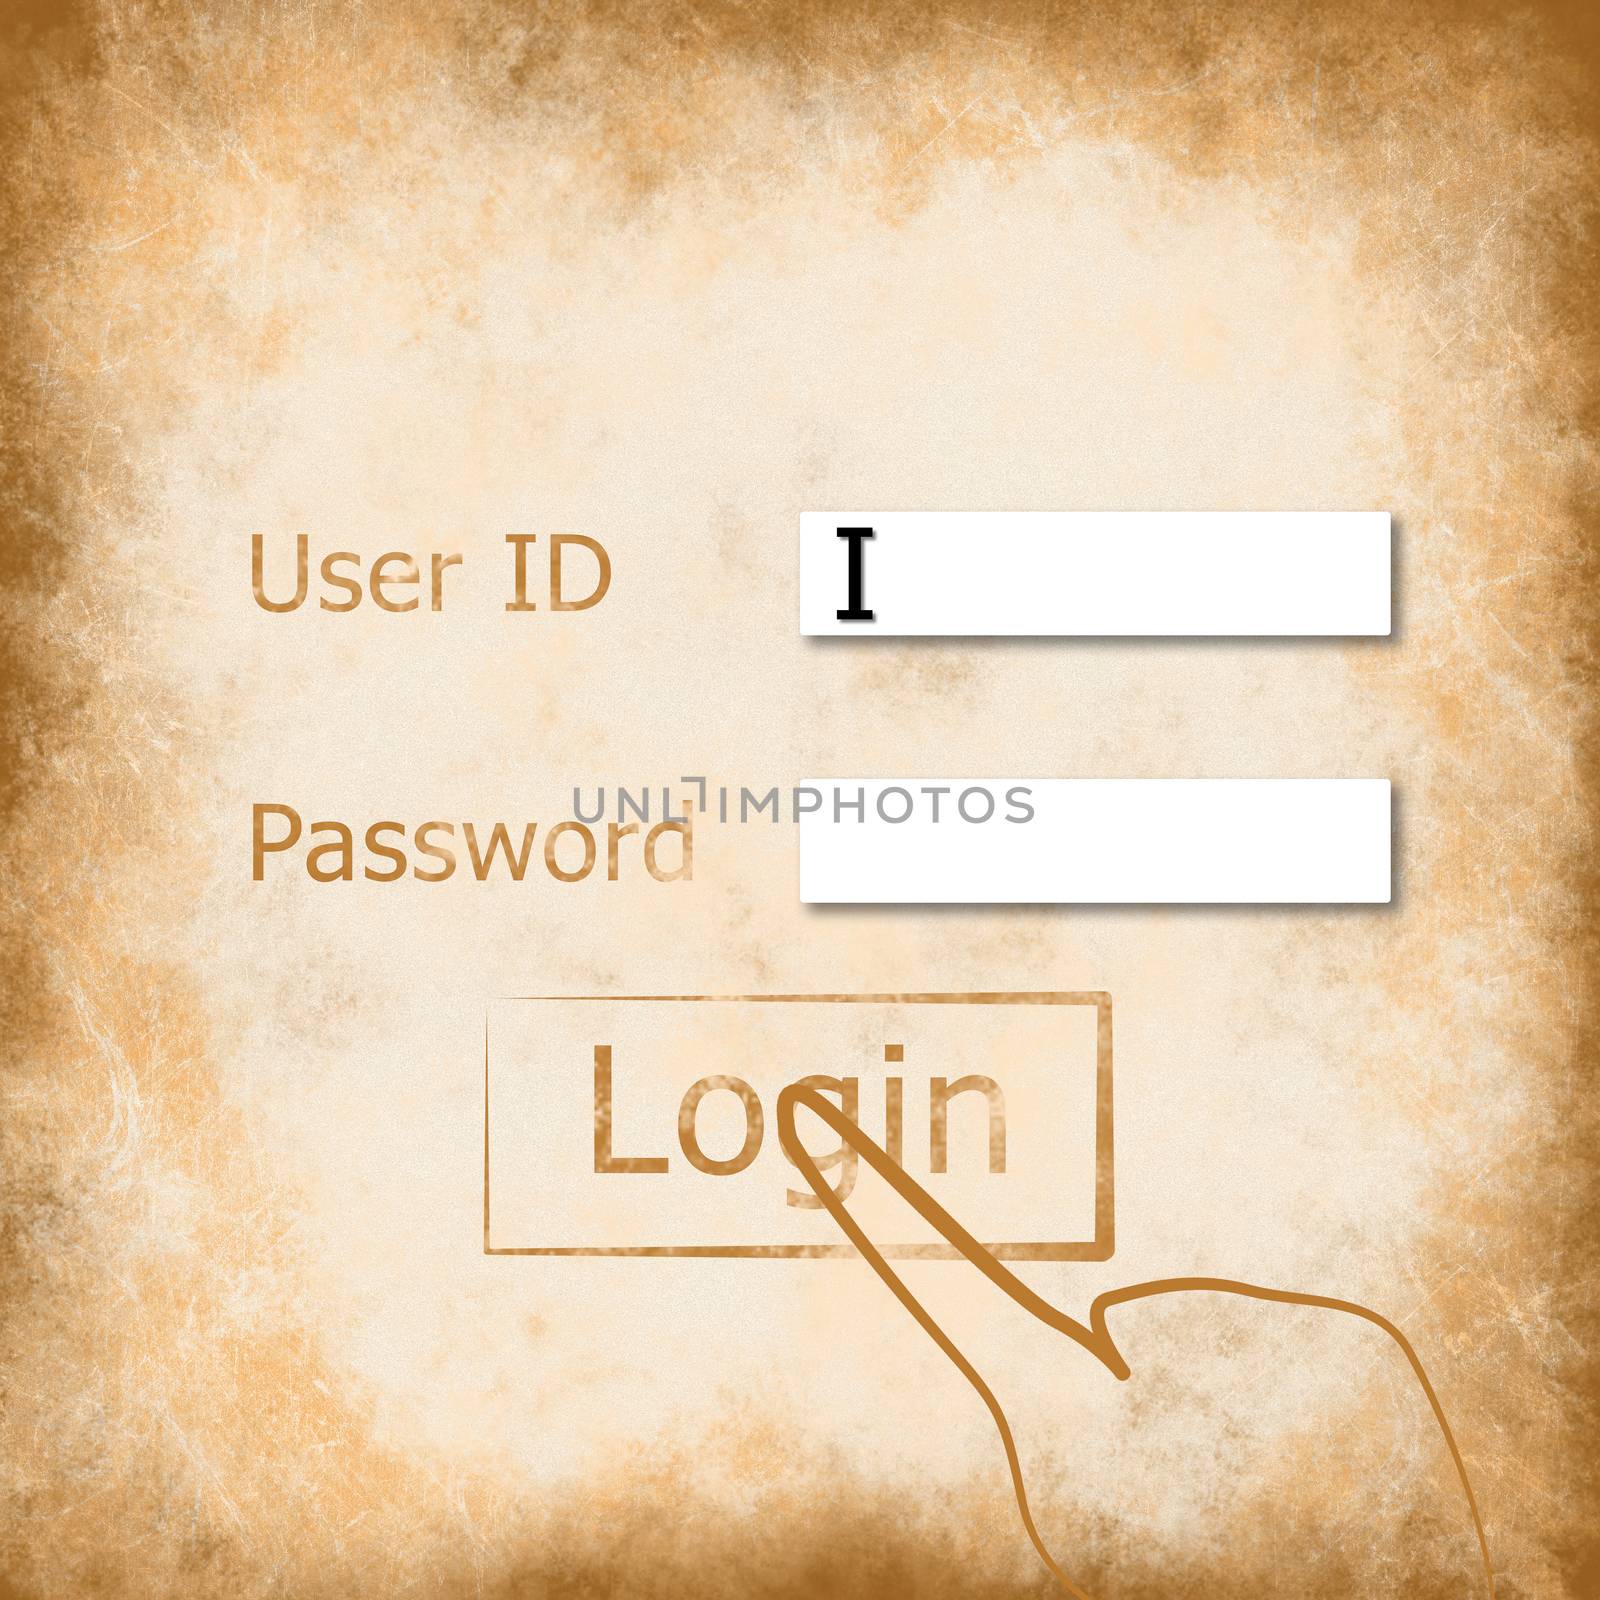 the background image of the login on the old paper